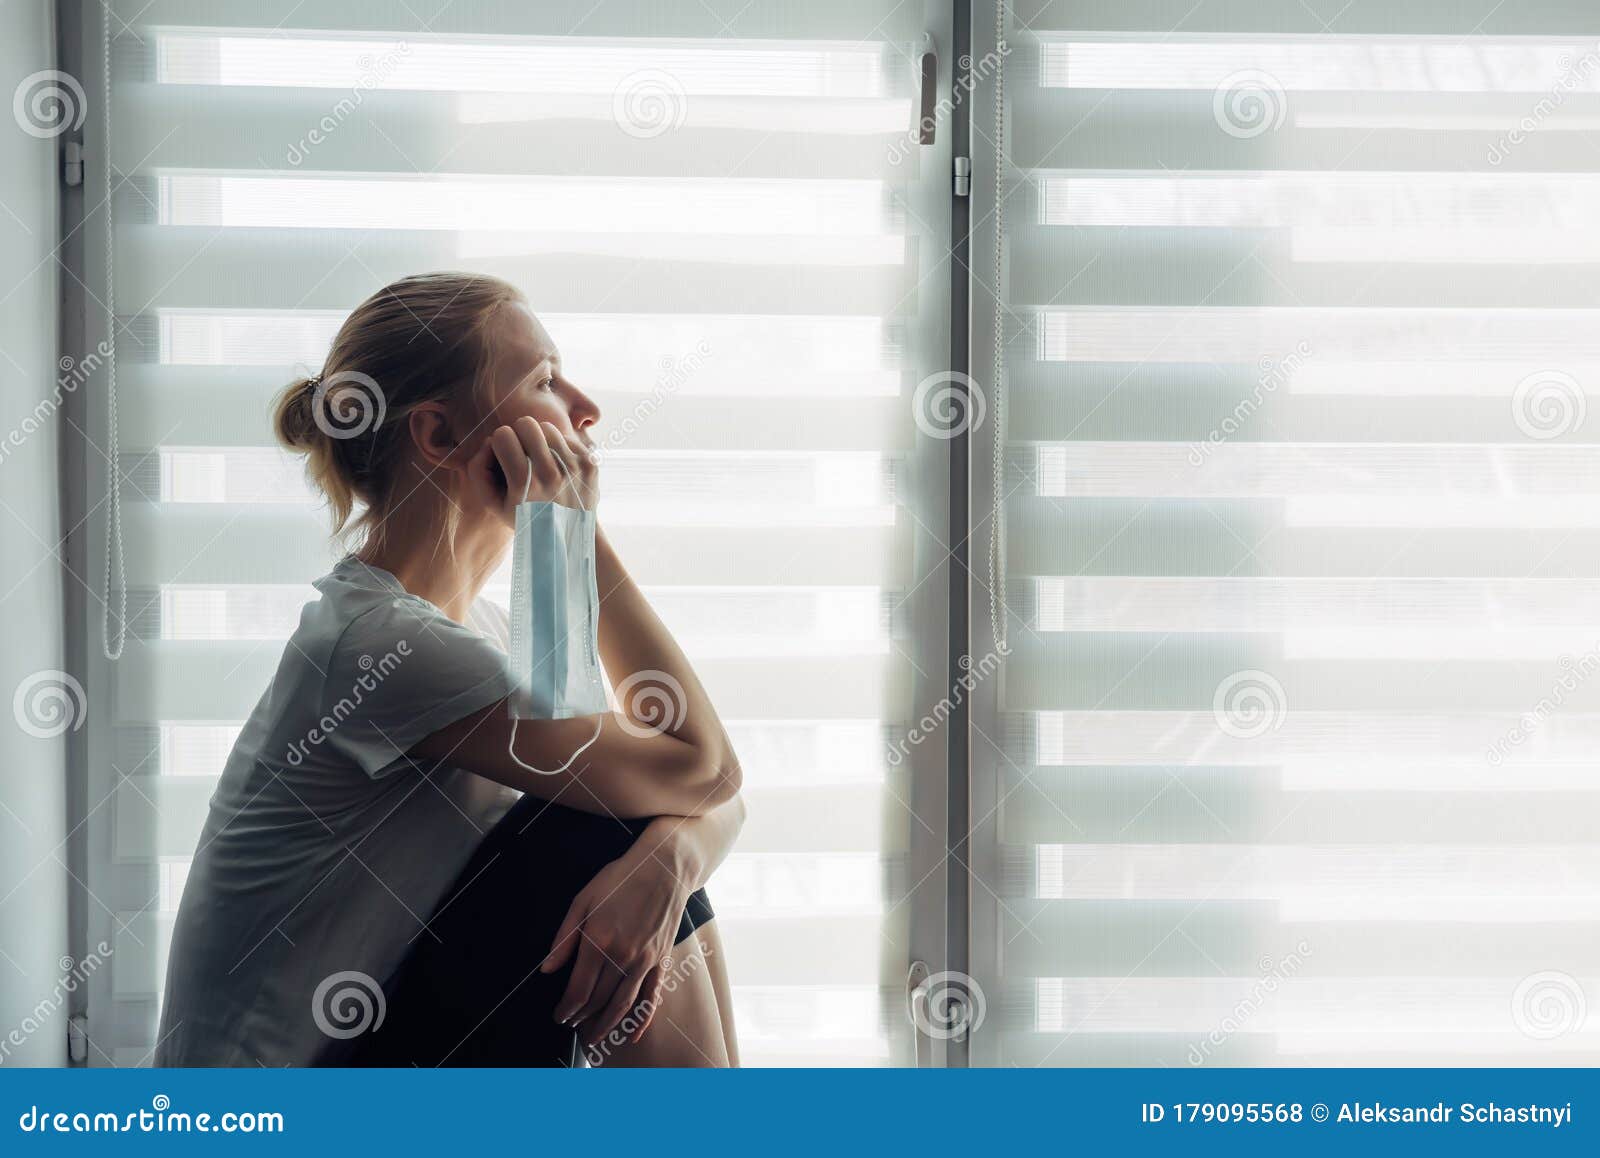 silhouette of alone woman sitting on the windowsill on the background of window. quarantine, self-isolation, stay at home. concept